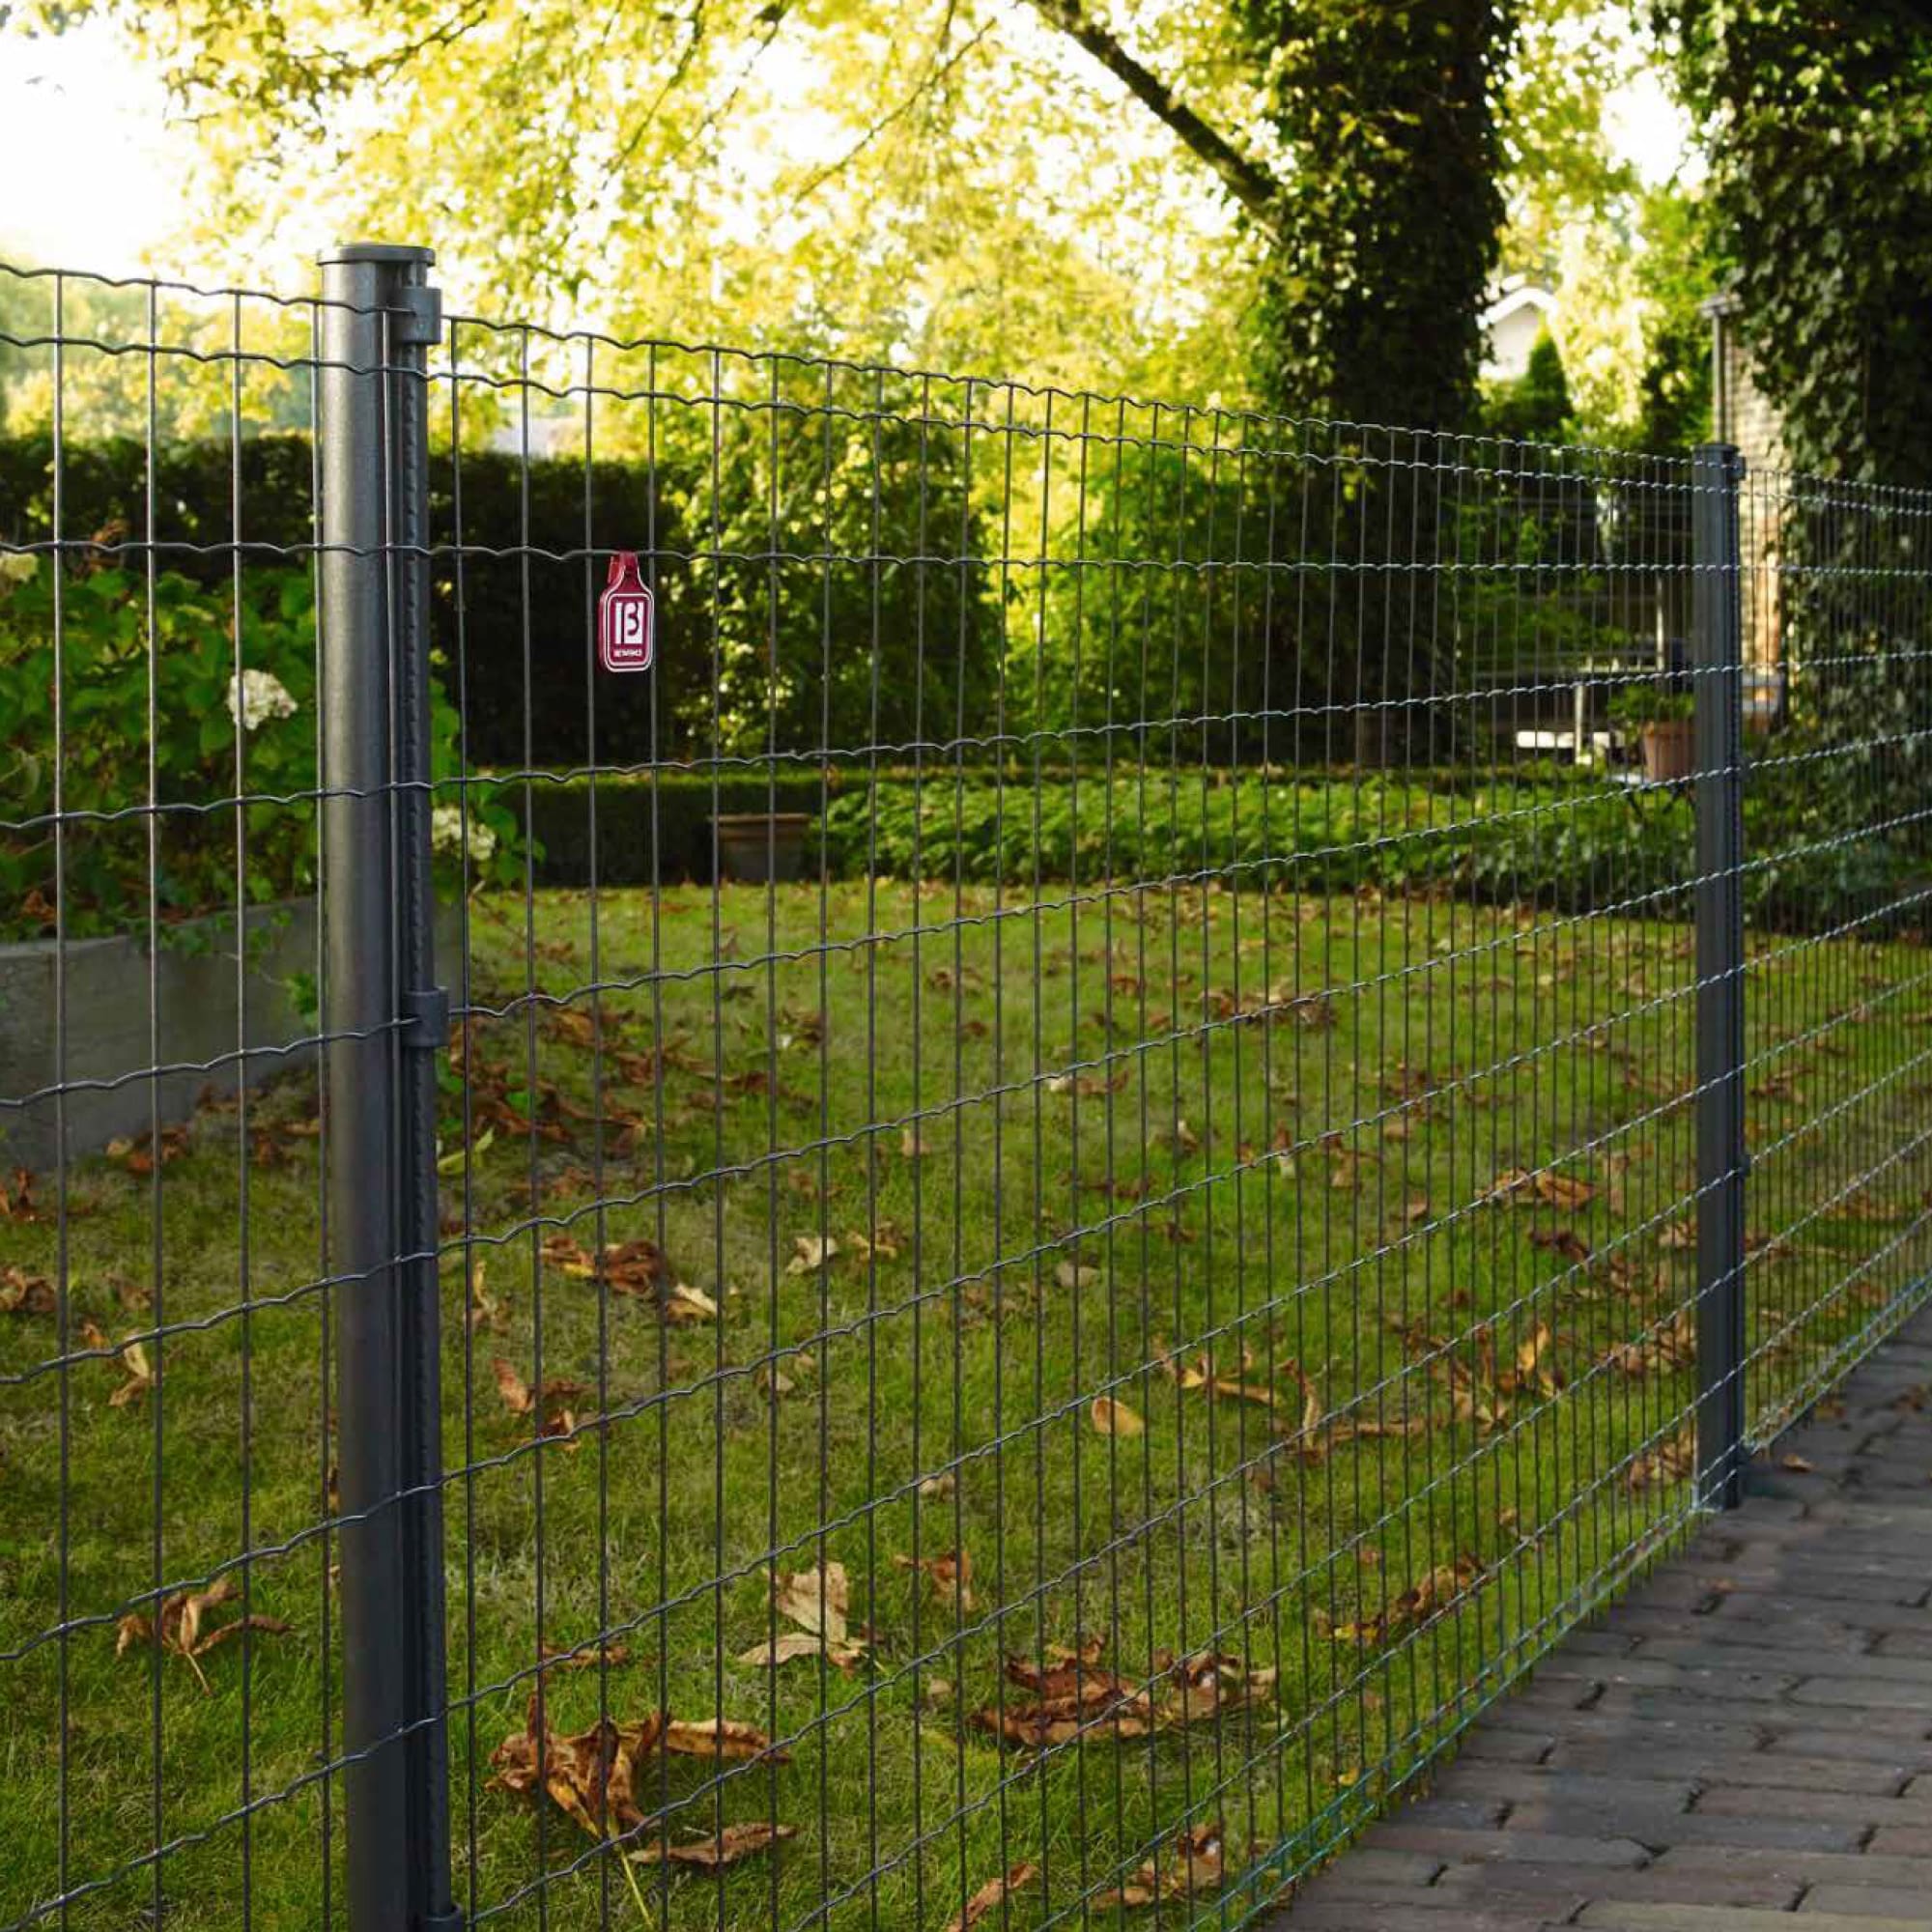 Lawn with green mesh fencing